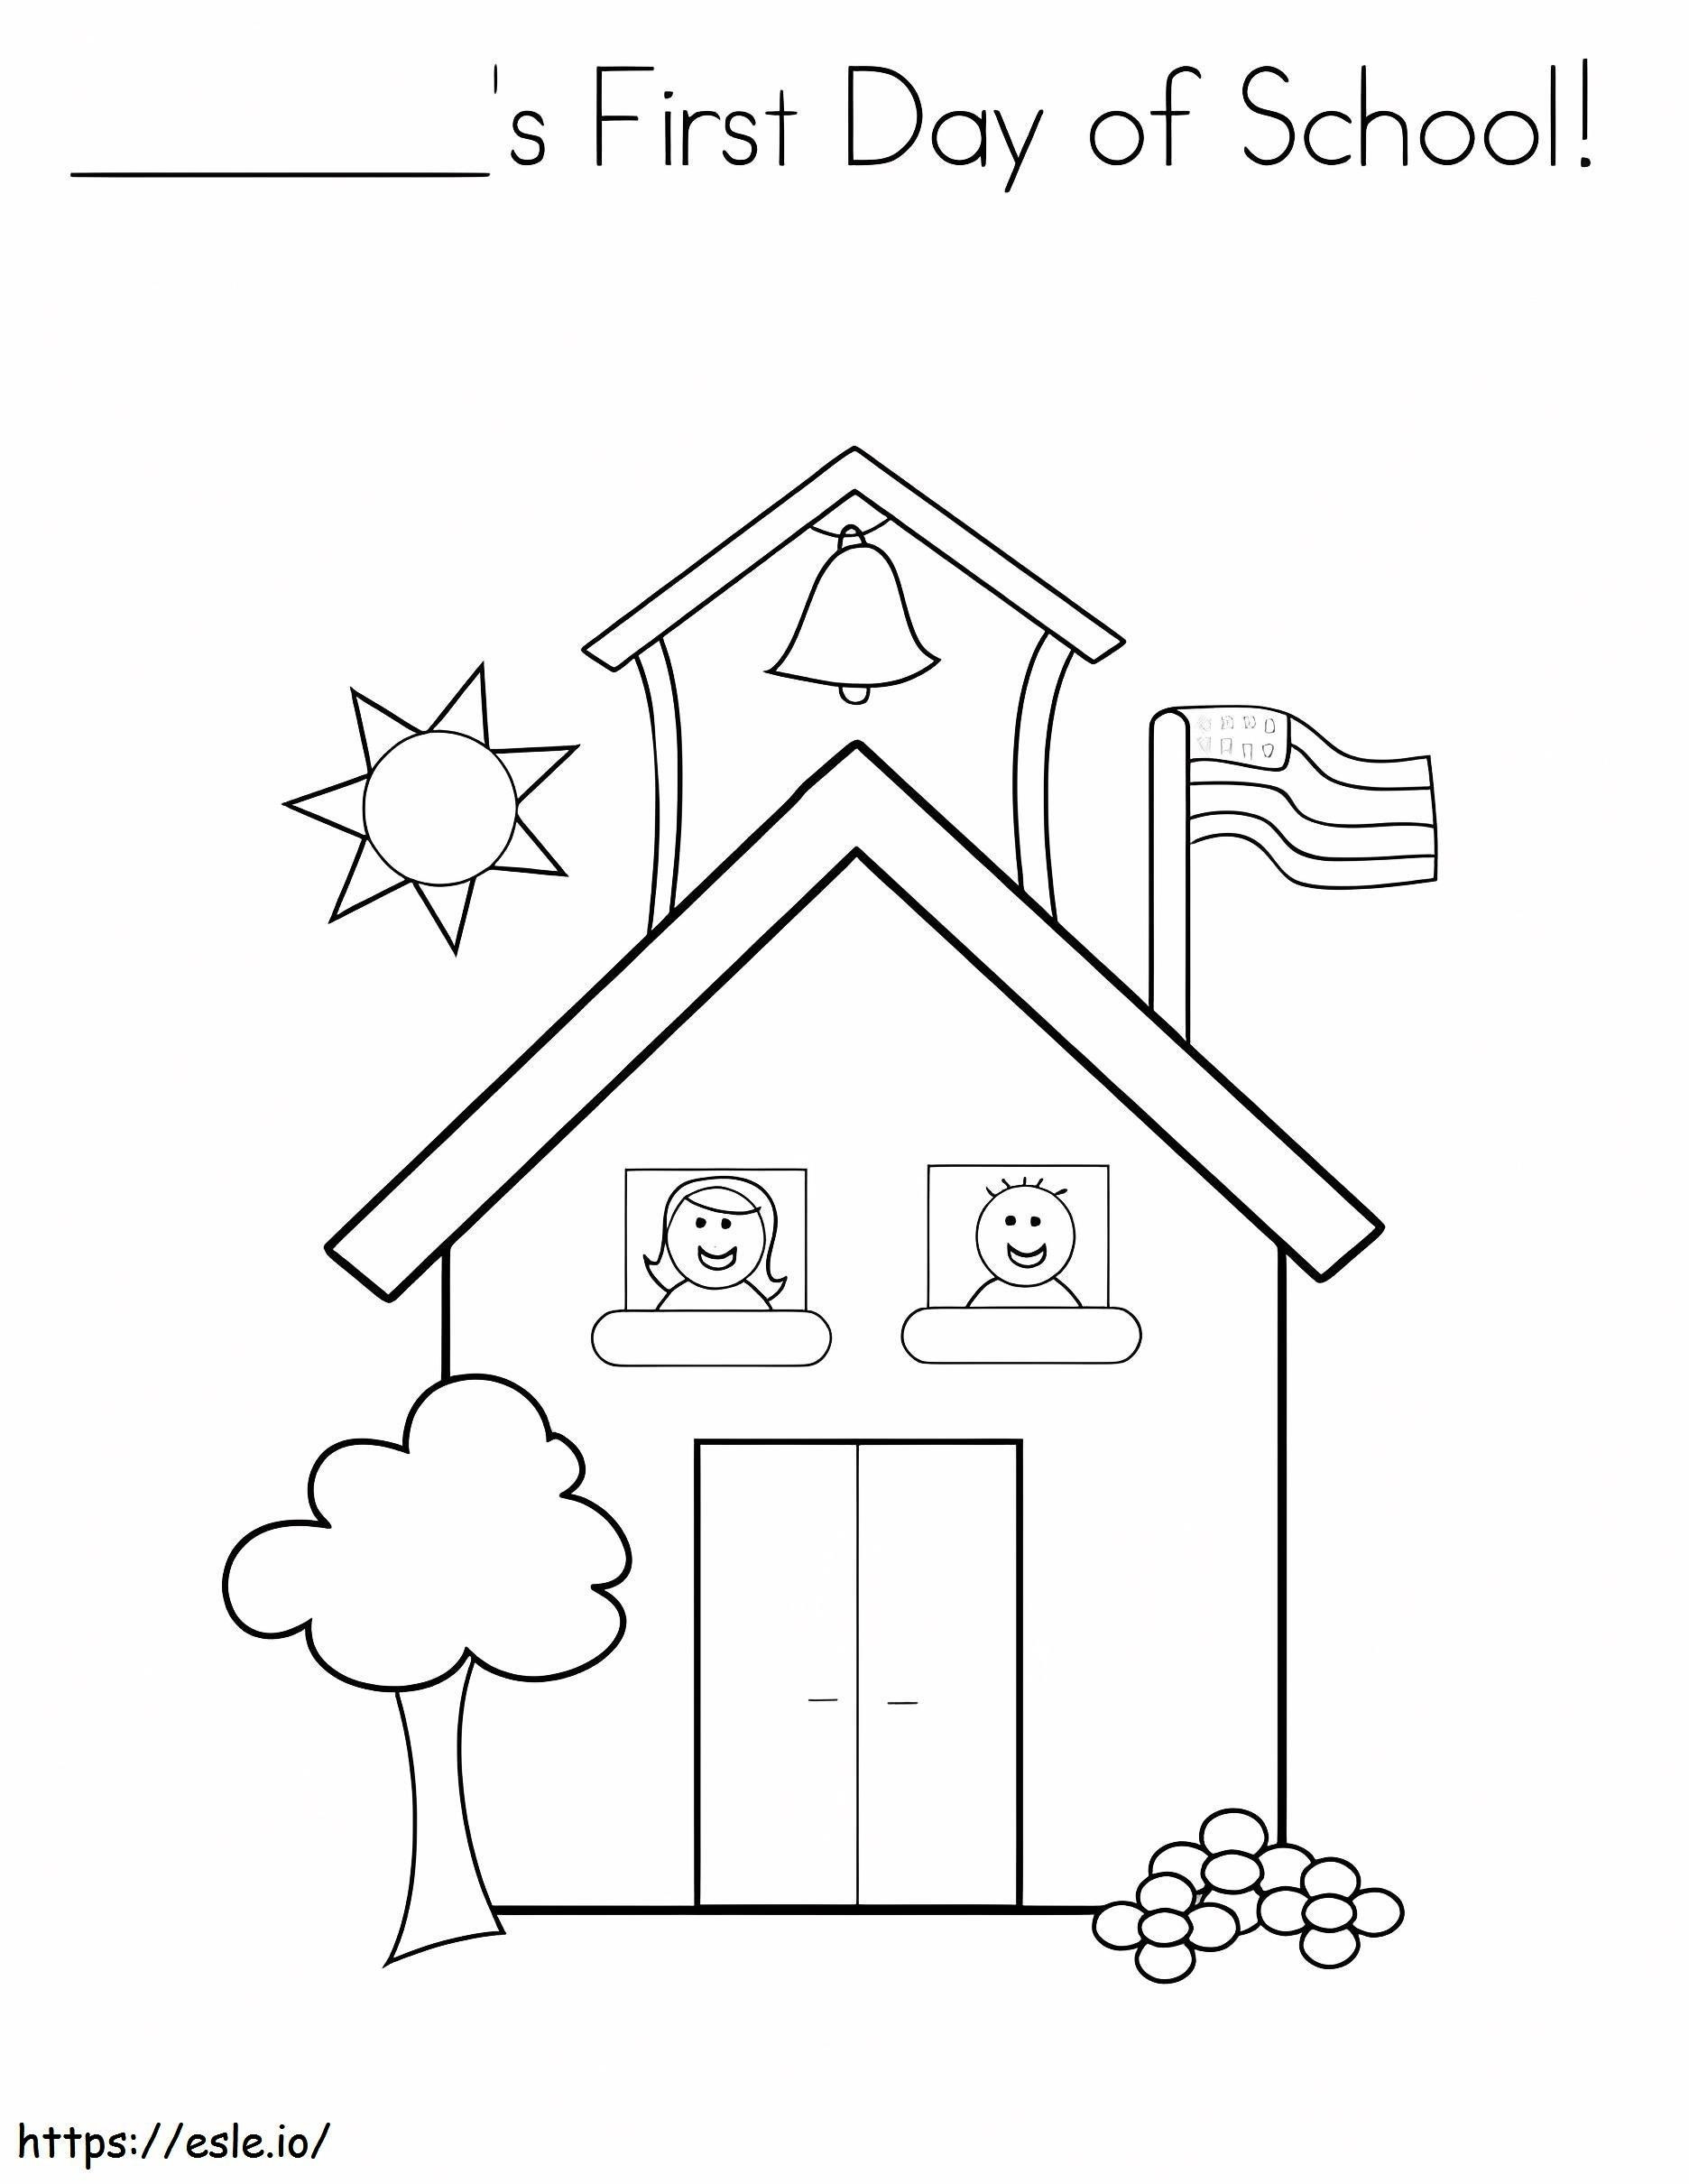 Print First Day Of School coloring page